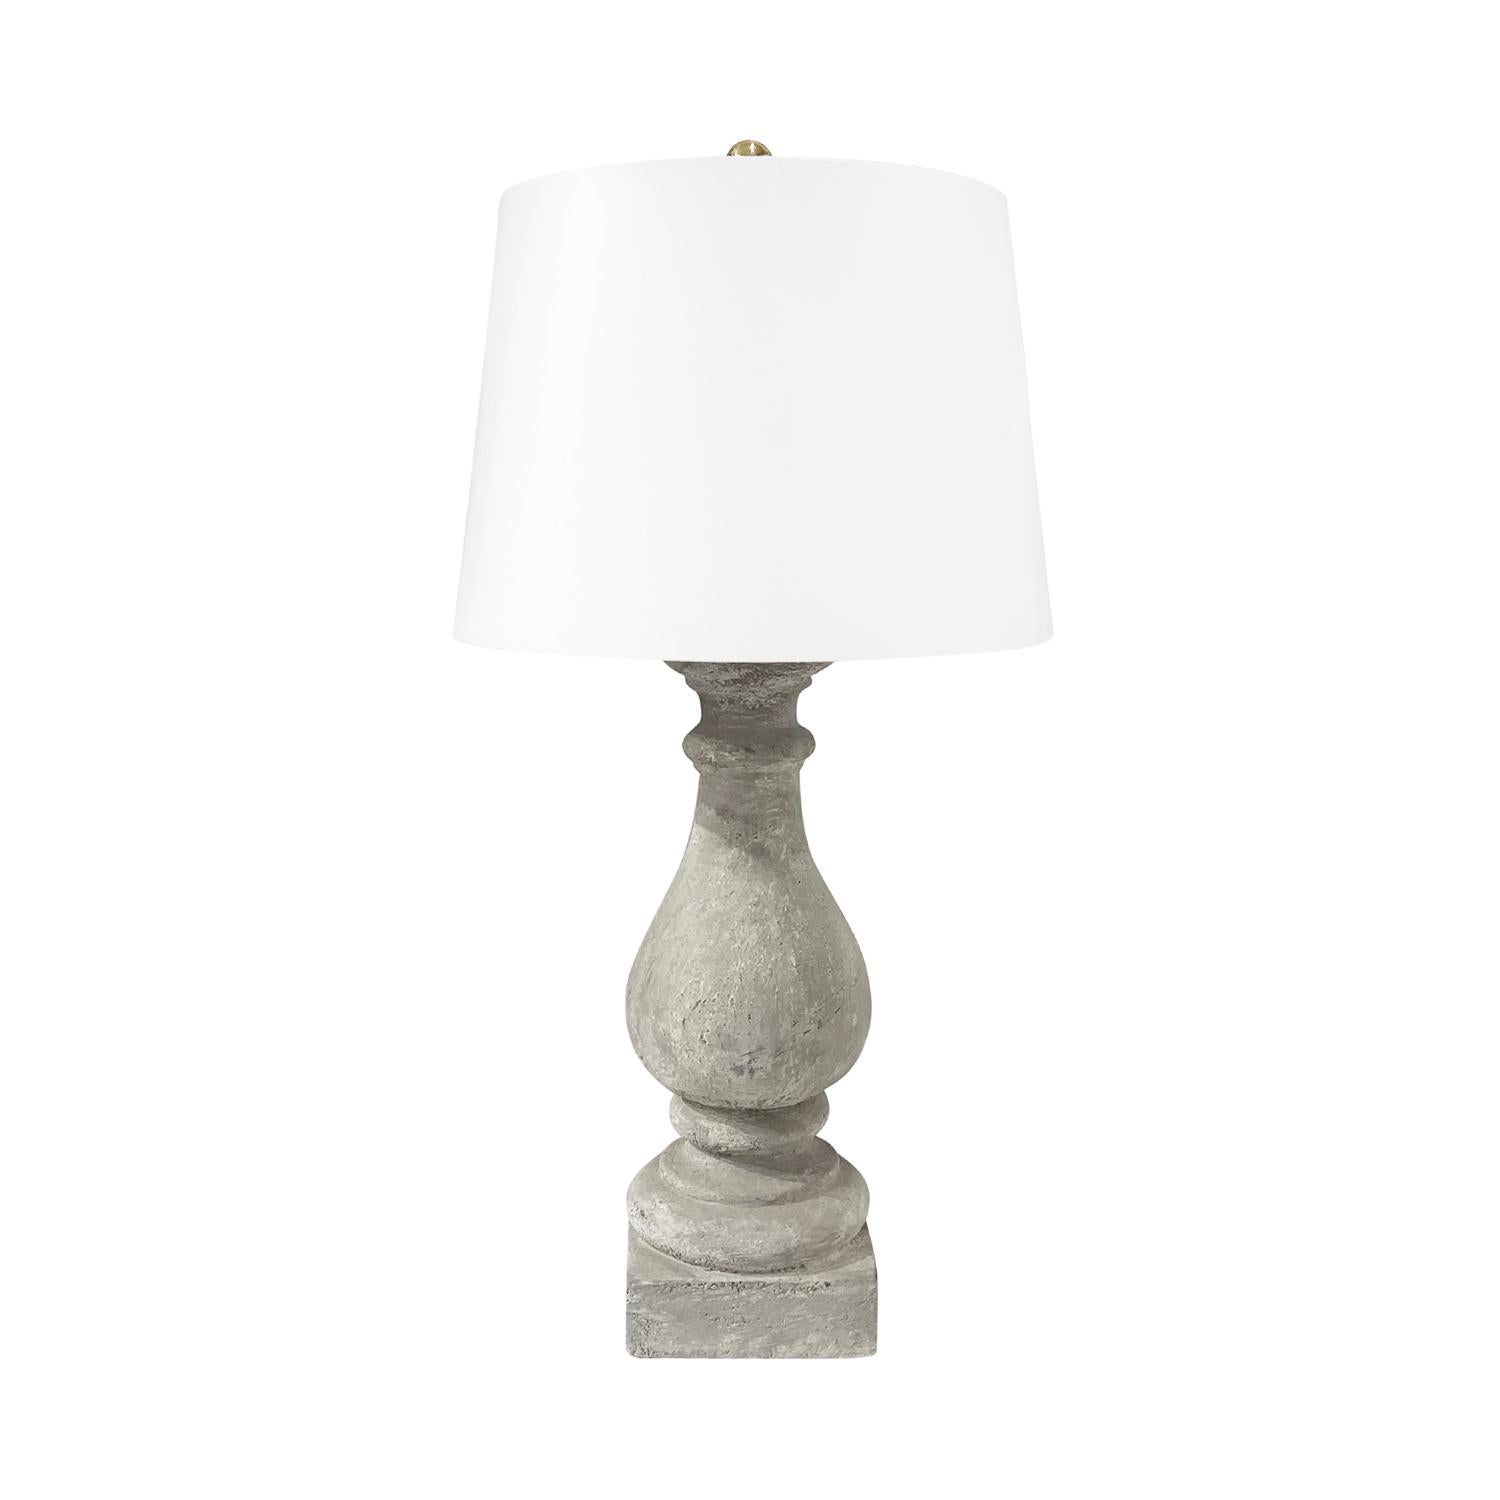 A white-grey, antique French pair of tall table lamps with a new white shade made of handcrafted pièrre composée, in good condition. The lights are detailed with a polished brass ring, featuring a one light socket. The wires have been renewed. Wear